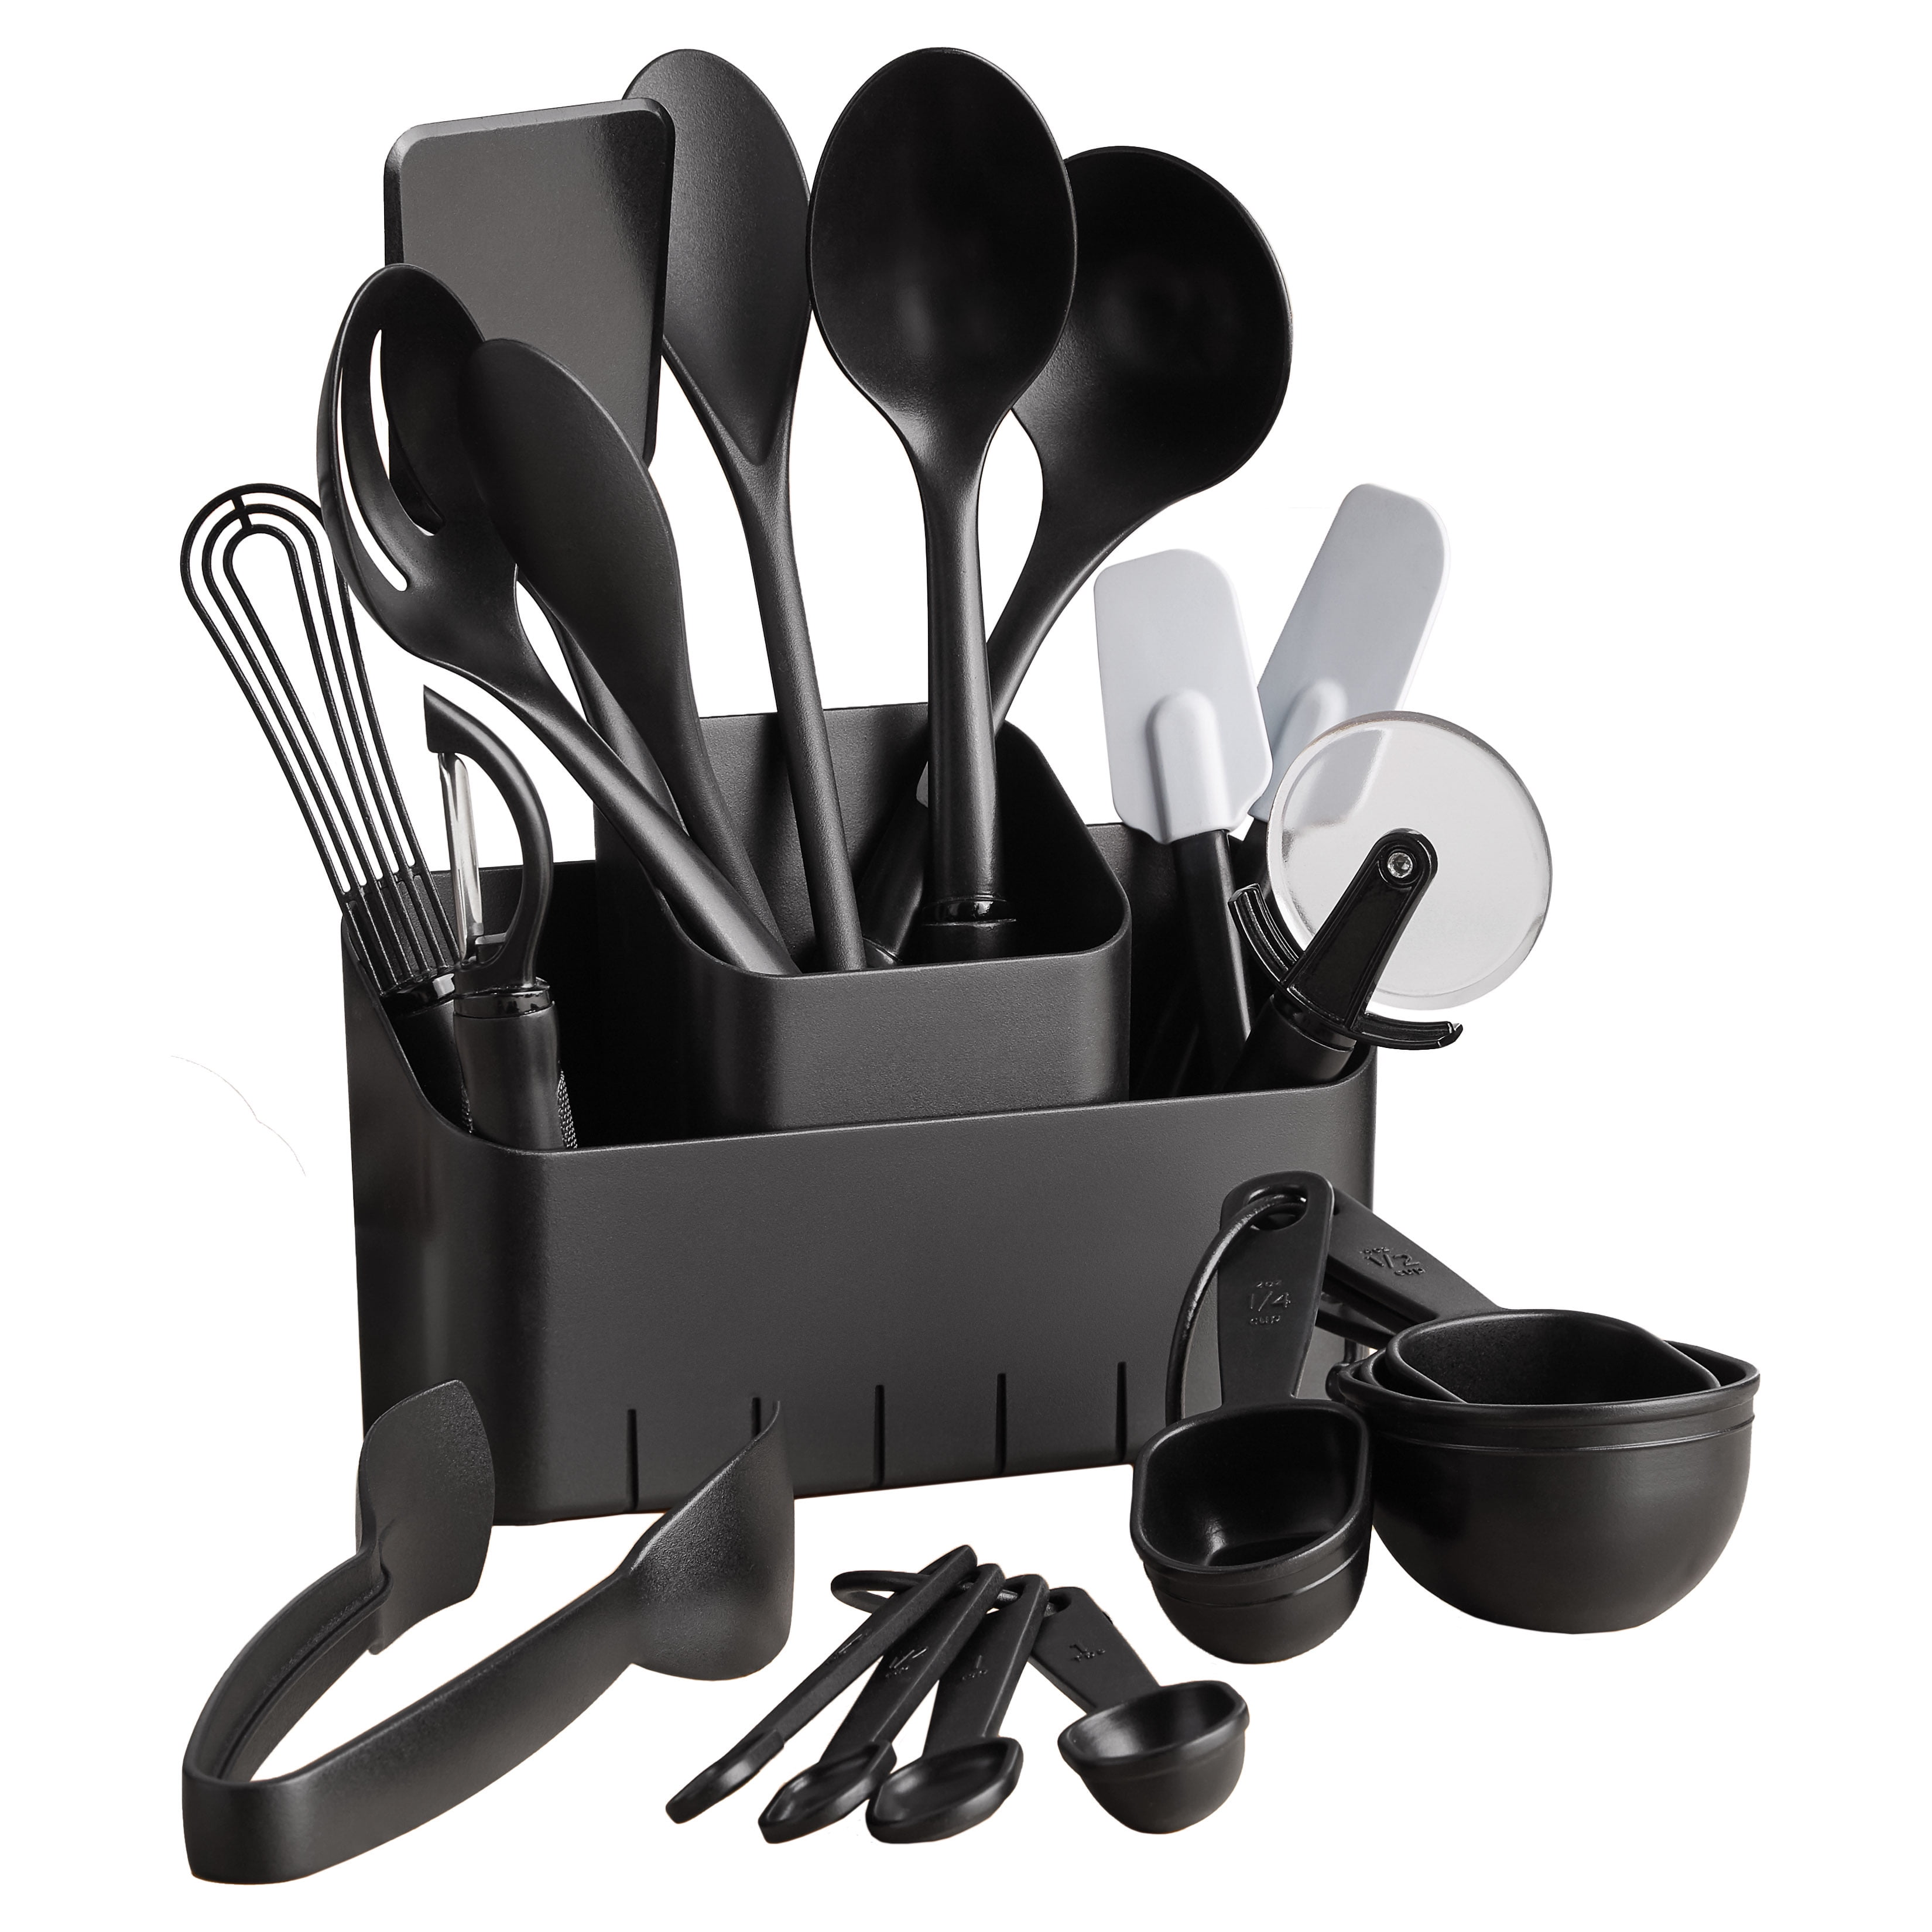 Country Kitchen 6 Pc Essentials Kitchen Stainless Steel Gadget Set Black  Gun Metal with Soft Touch Black Handles for Cooking